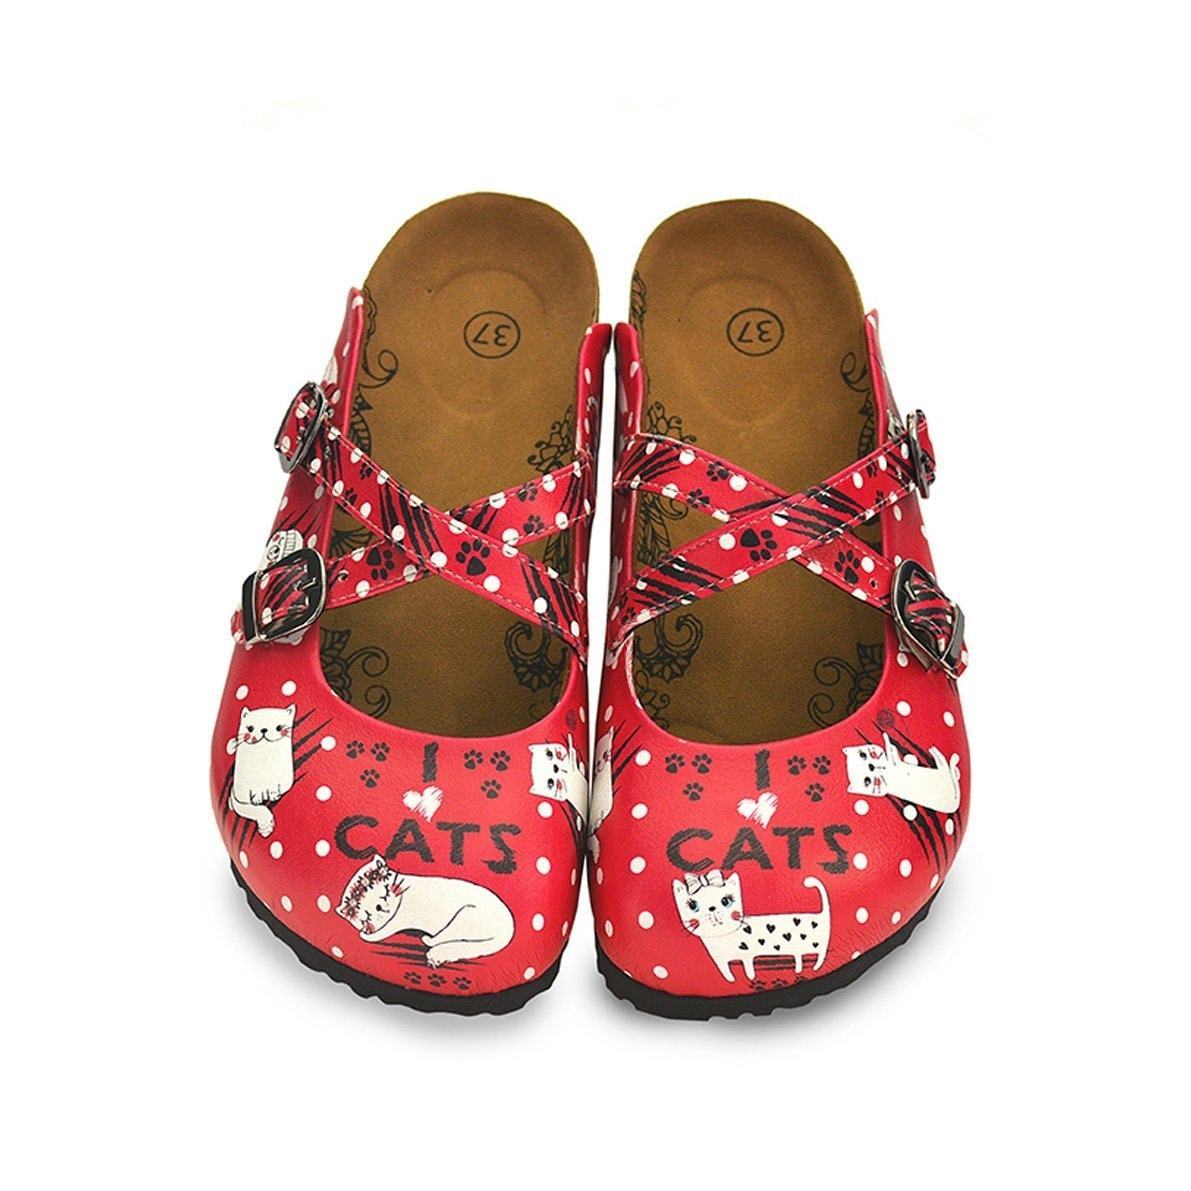 Red I Love Cats Cross-Strap Clogs WCAL132 (737699561568)